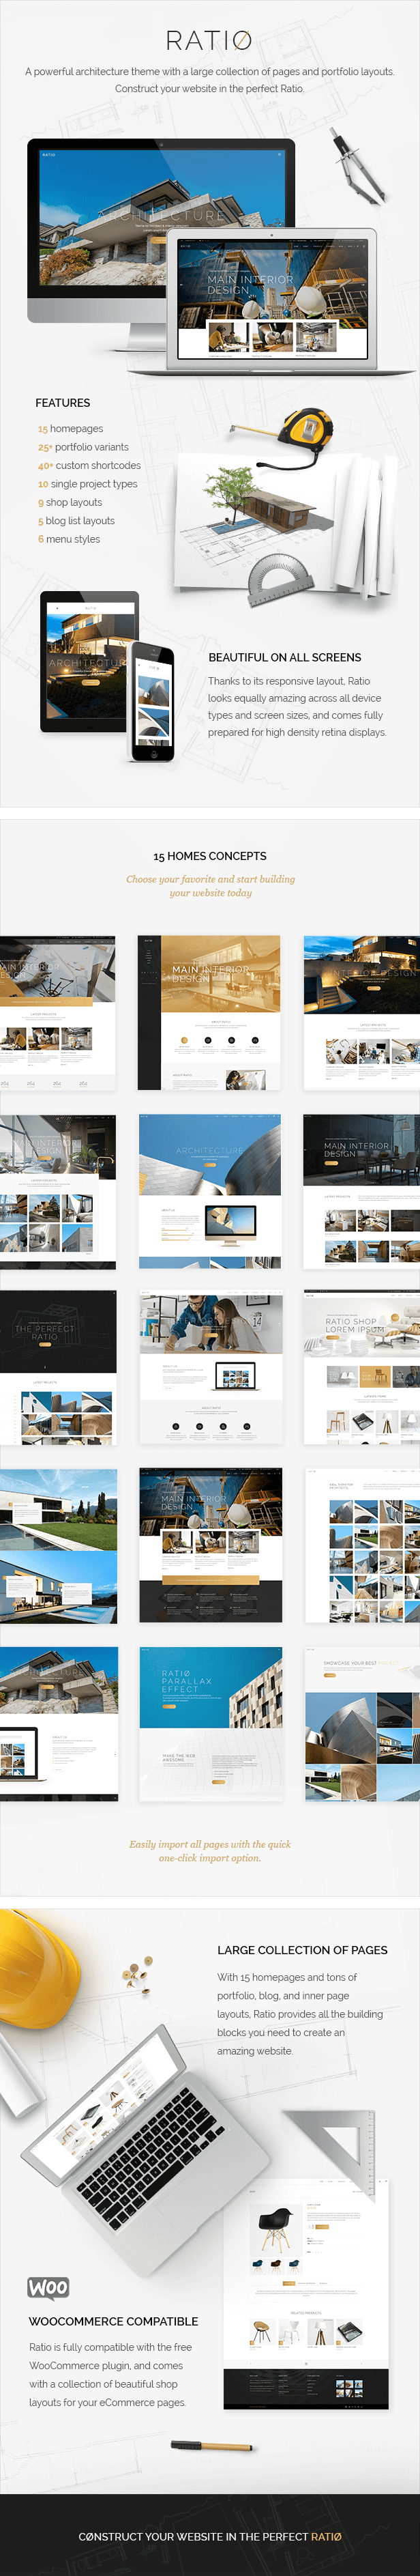 Ratio - A Powerful Interior Design and Architecture Theme - 1